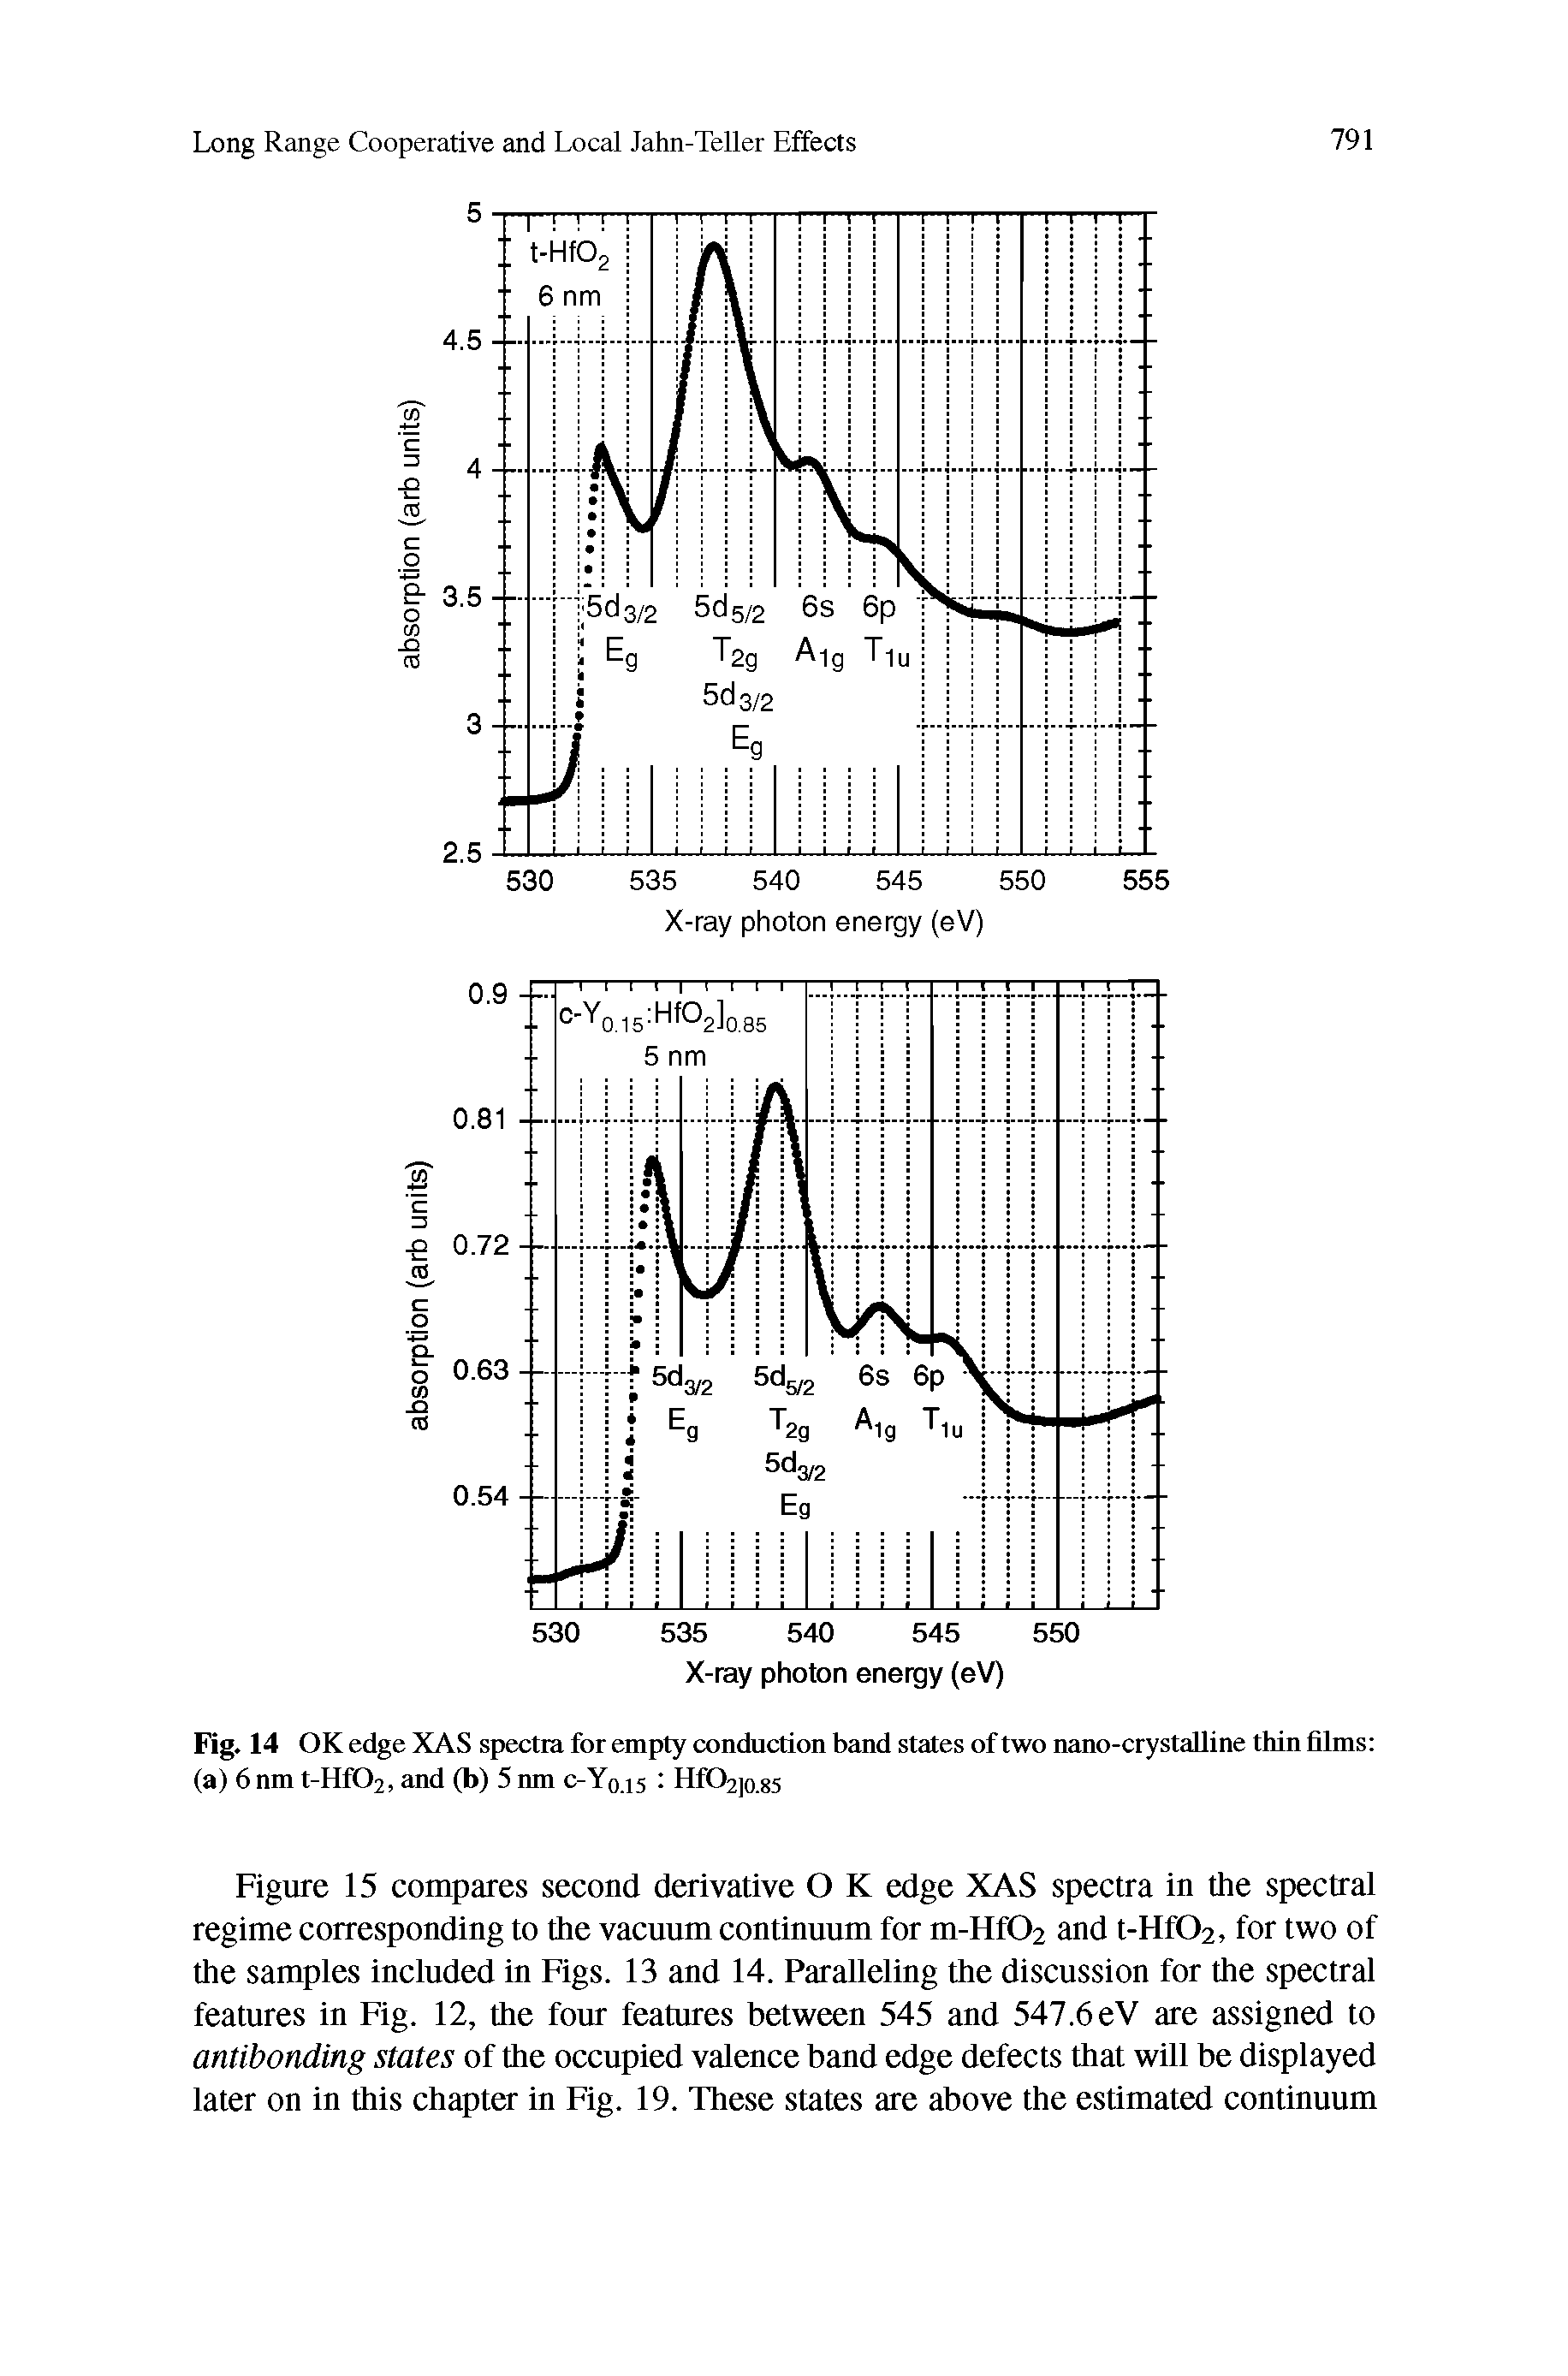 Figure 15 compares second derivative O K edge XAS spectra in the spectral regime corresponding to the vacuum continuum for m-Hf02 and t-Hf02, for two of the samples included in Figs. 13 and 14. Paralleling the discussion for the spectral features in Fig. 12, the four features between 545 and 547.6 eV are assigned to antibonding states of the occupied valence band edge defects that will be displayed later on in this chapter in Fig. 19. These states are above the estimated continuum...